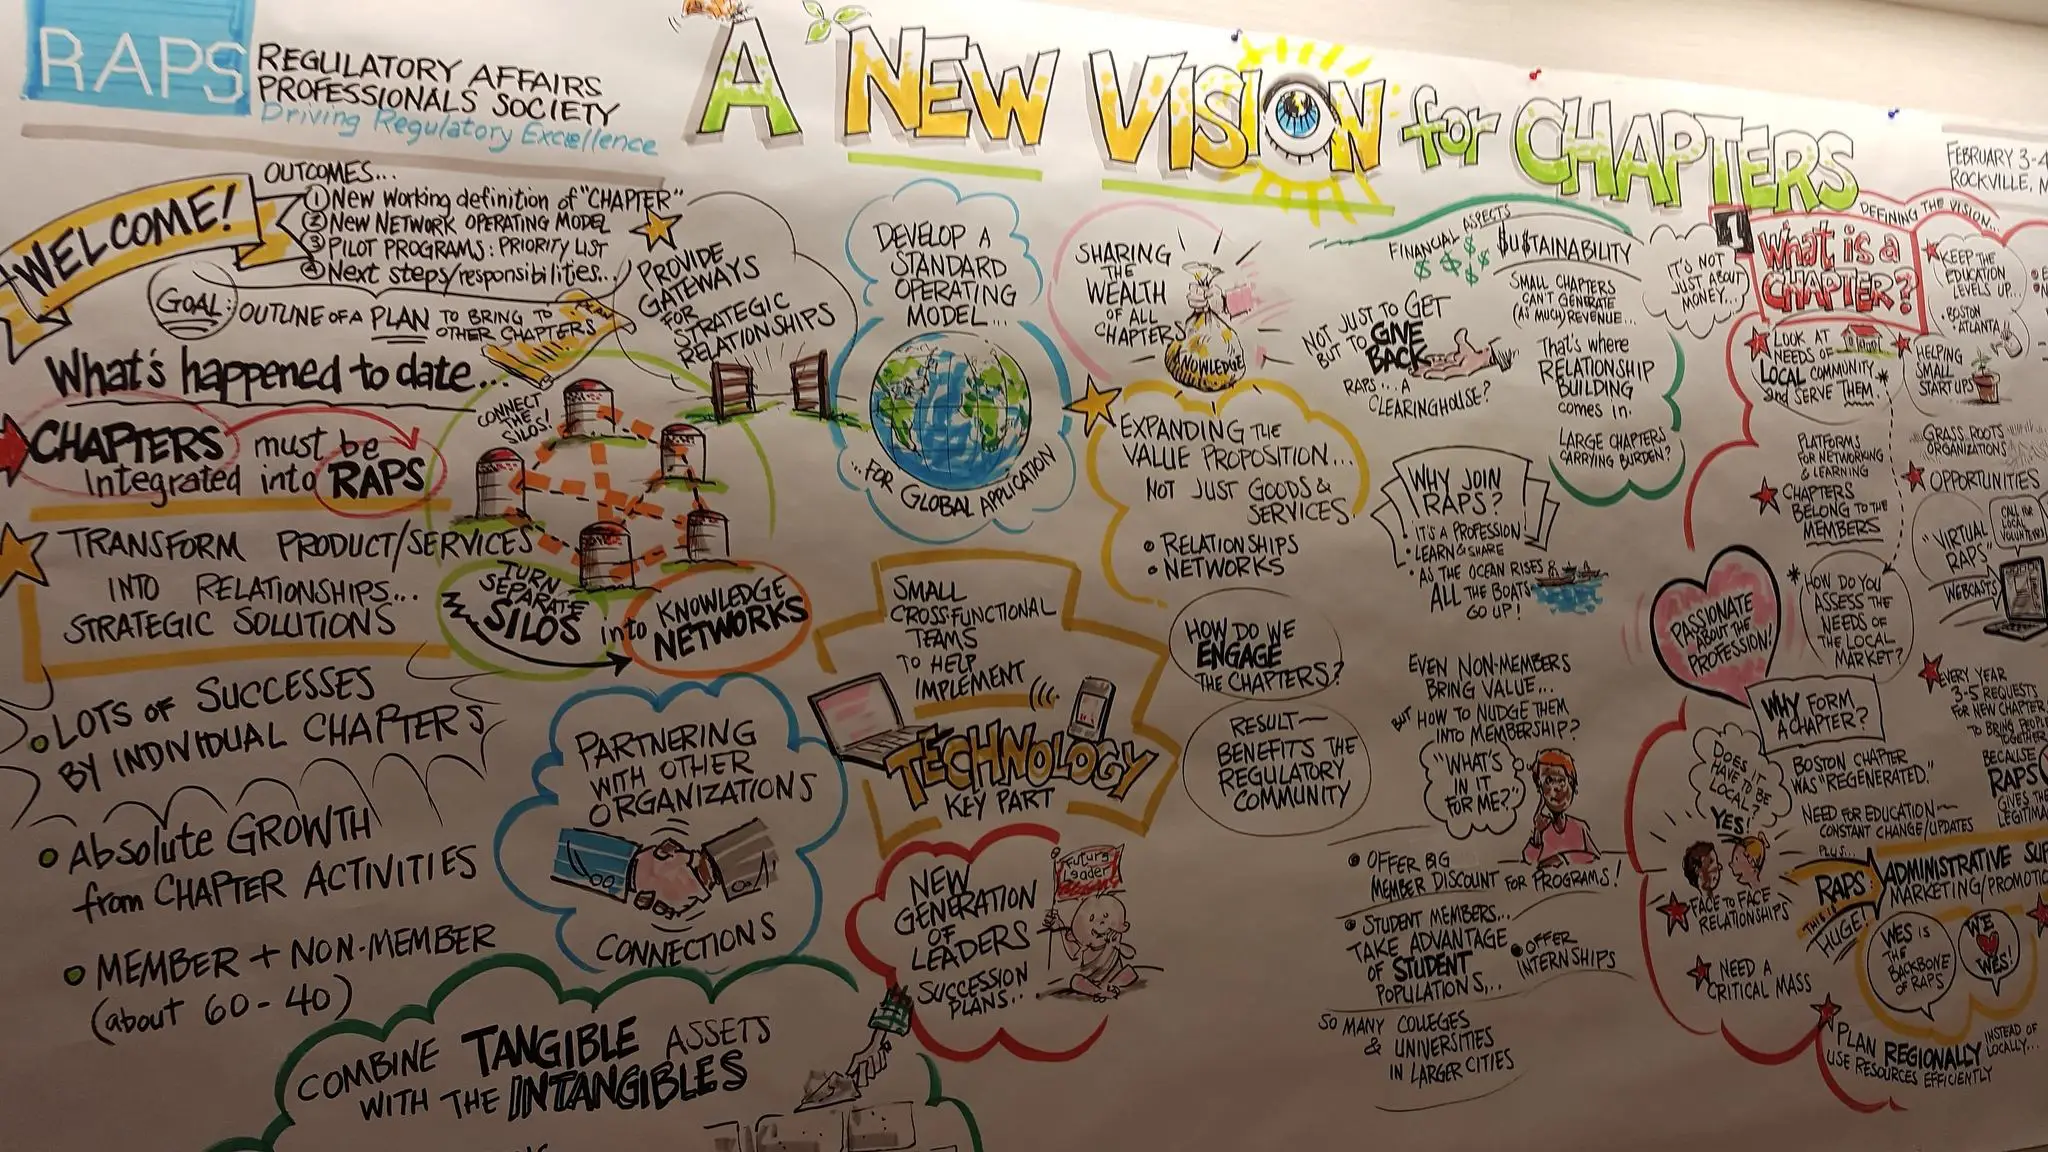 A new vision for chapters - RAPS